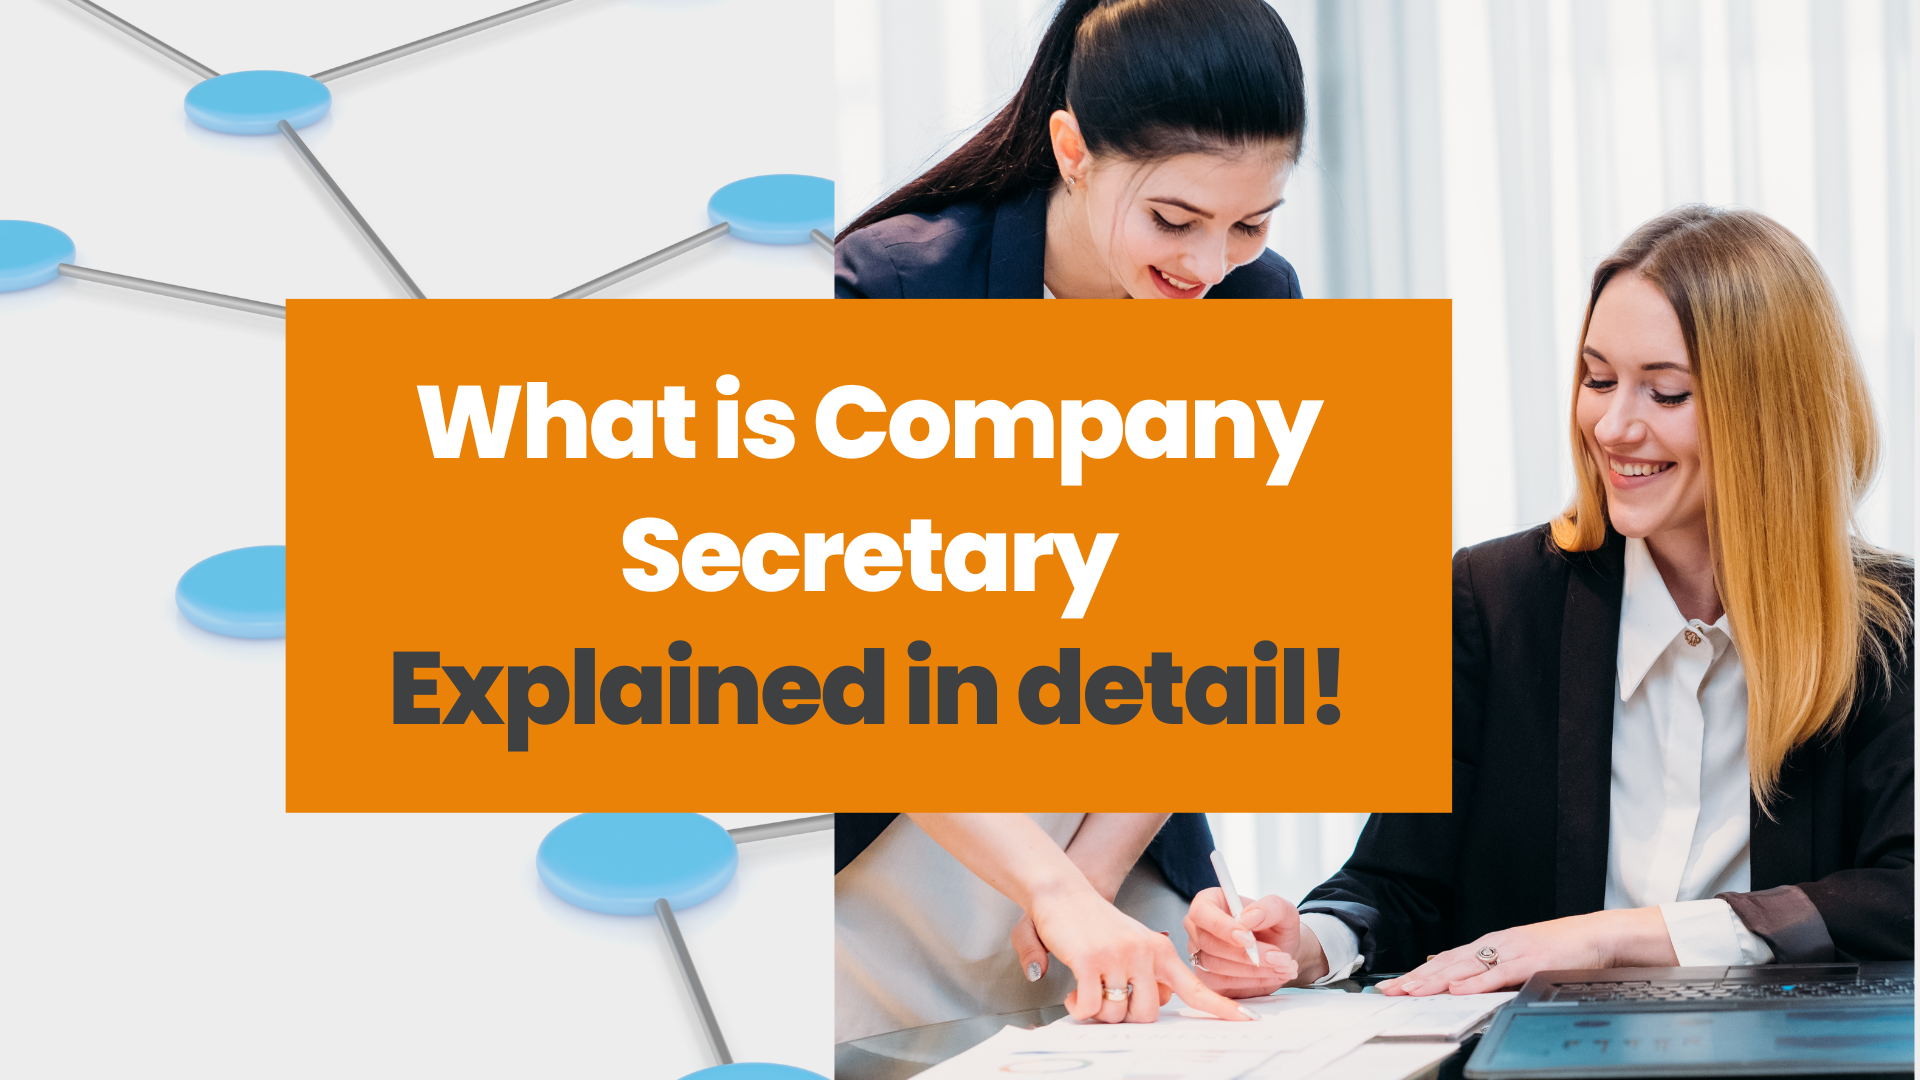 What is Company Secretary Explained in detail!